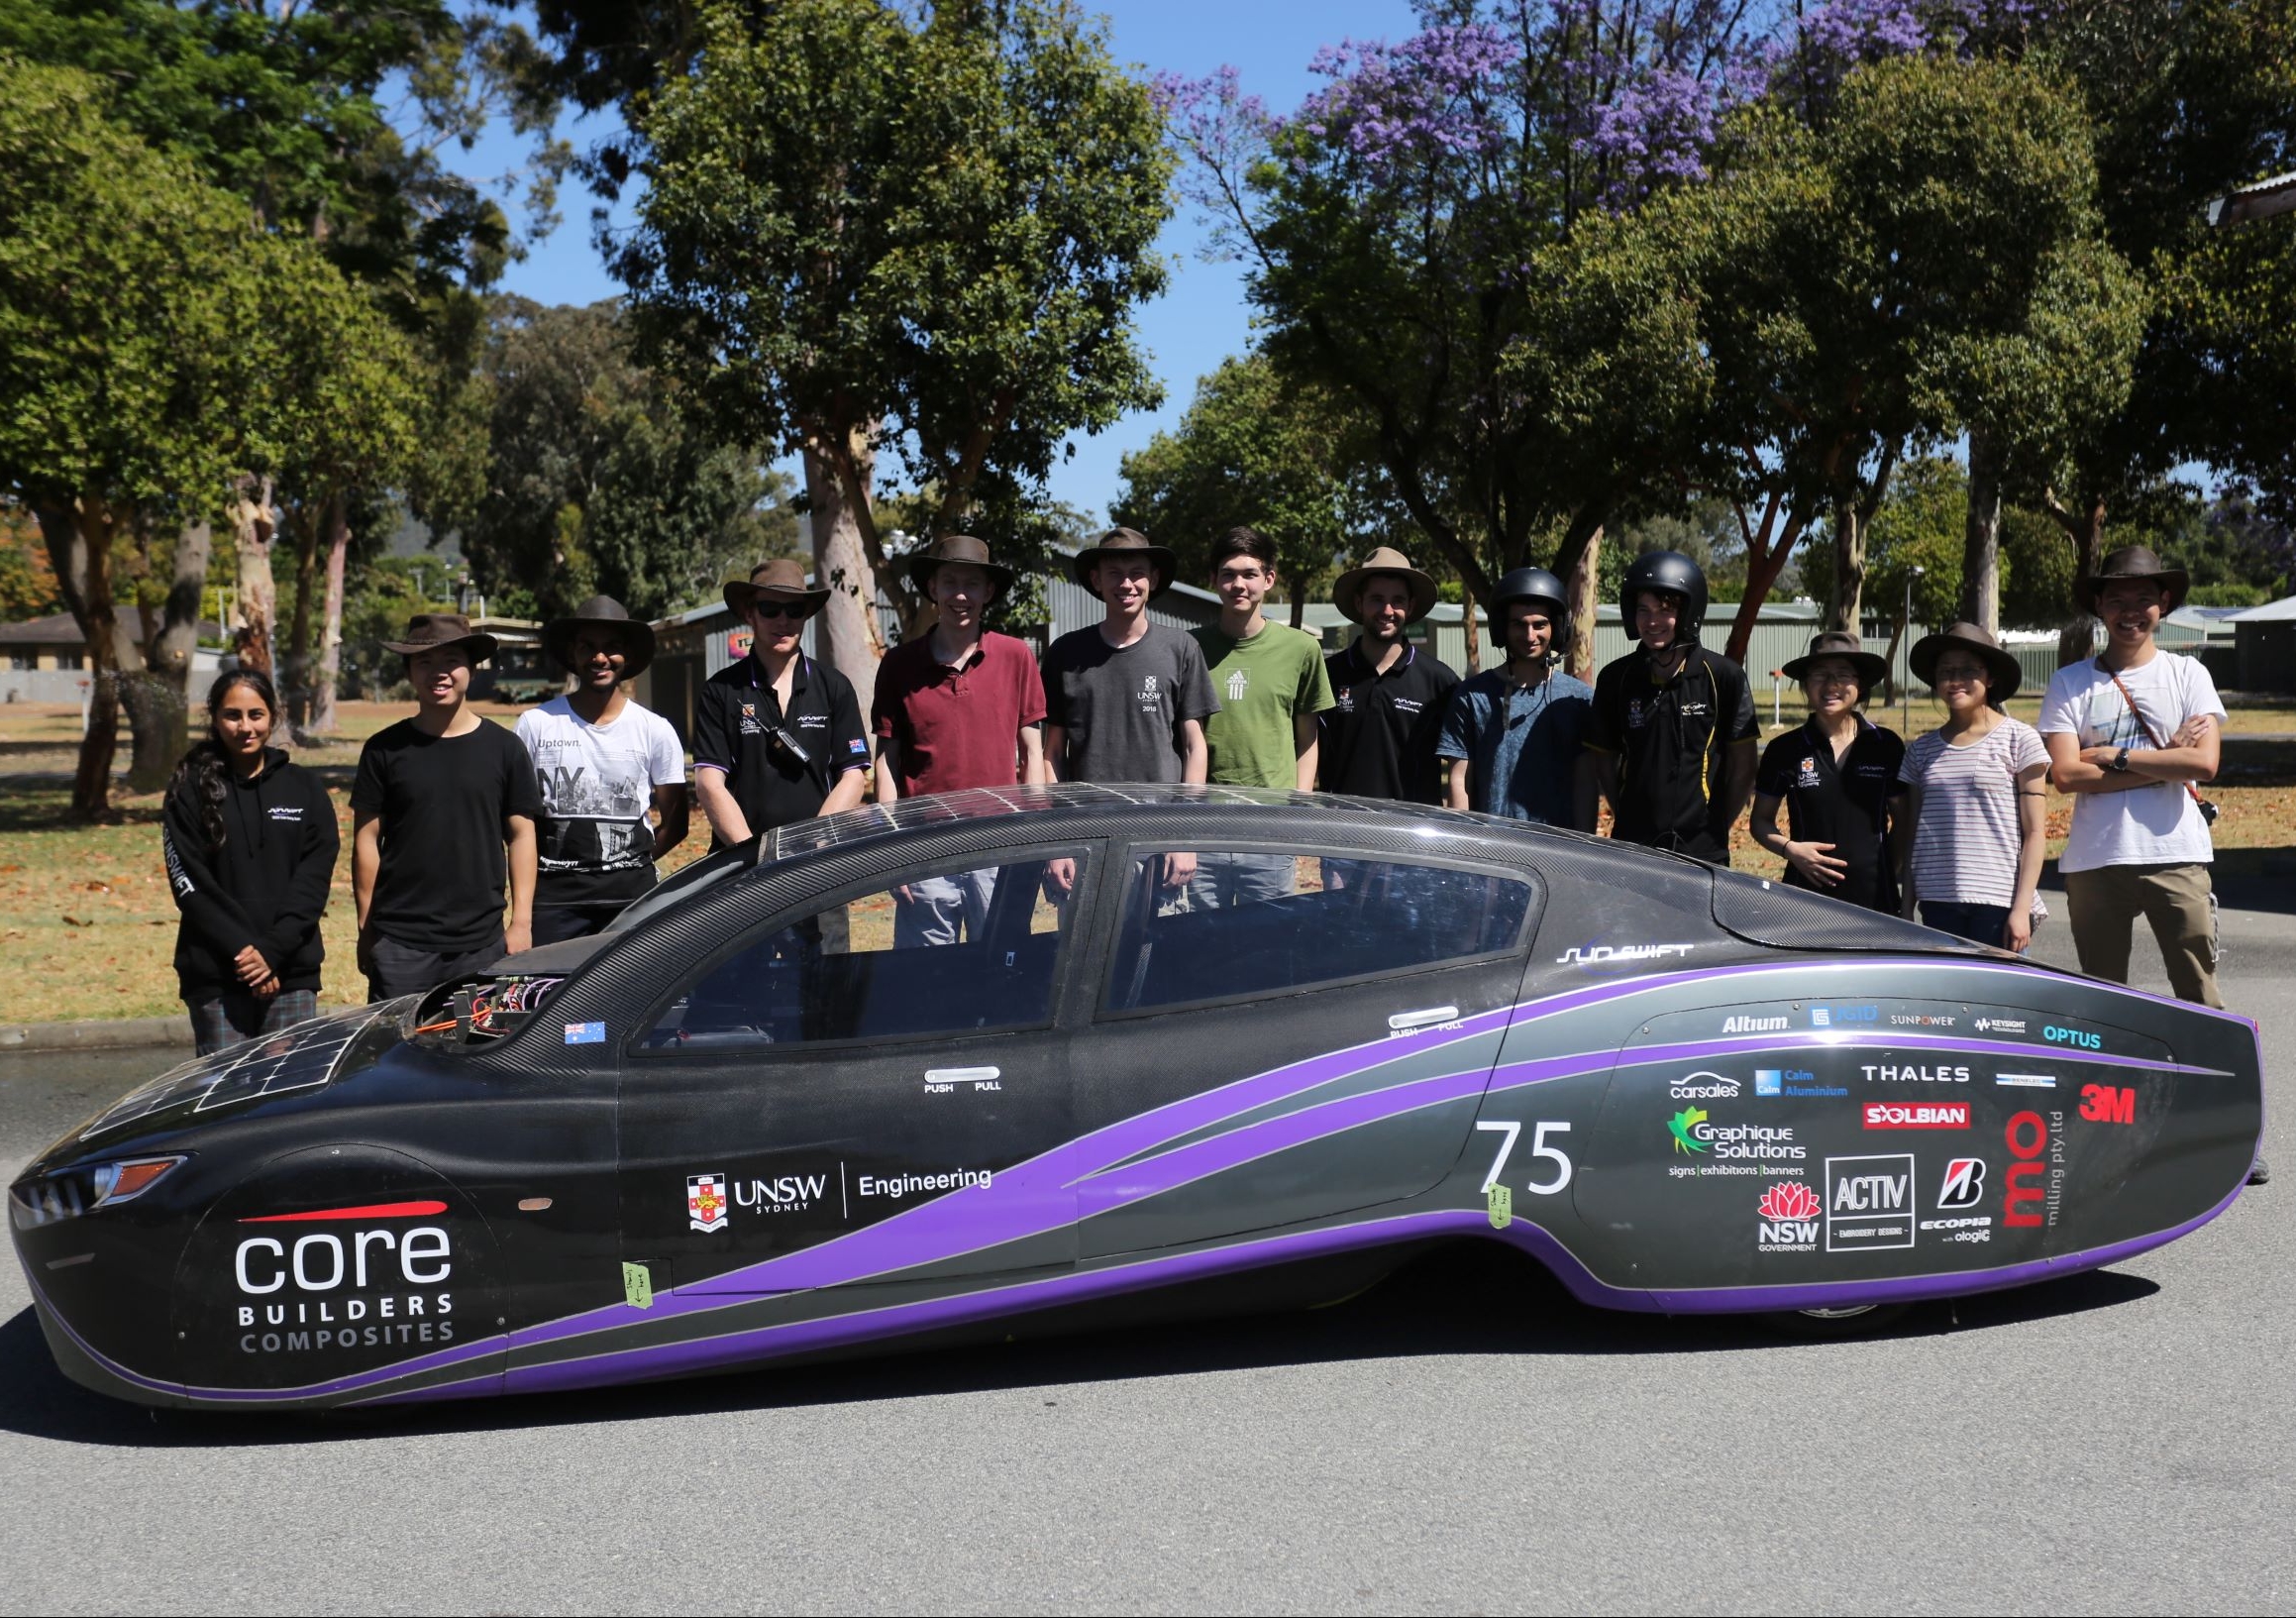 The Sunswift team and Violet plan to start their record attempt on Saturday.